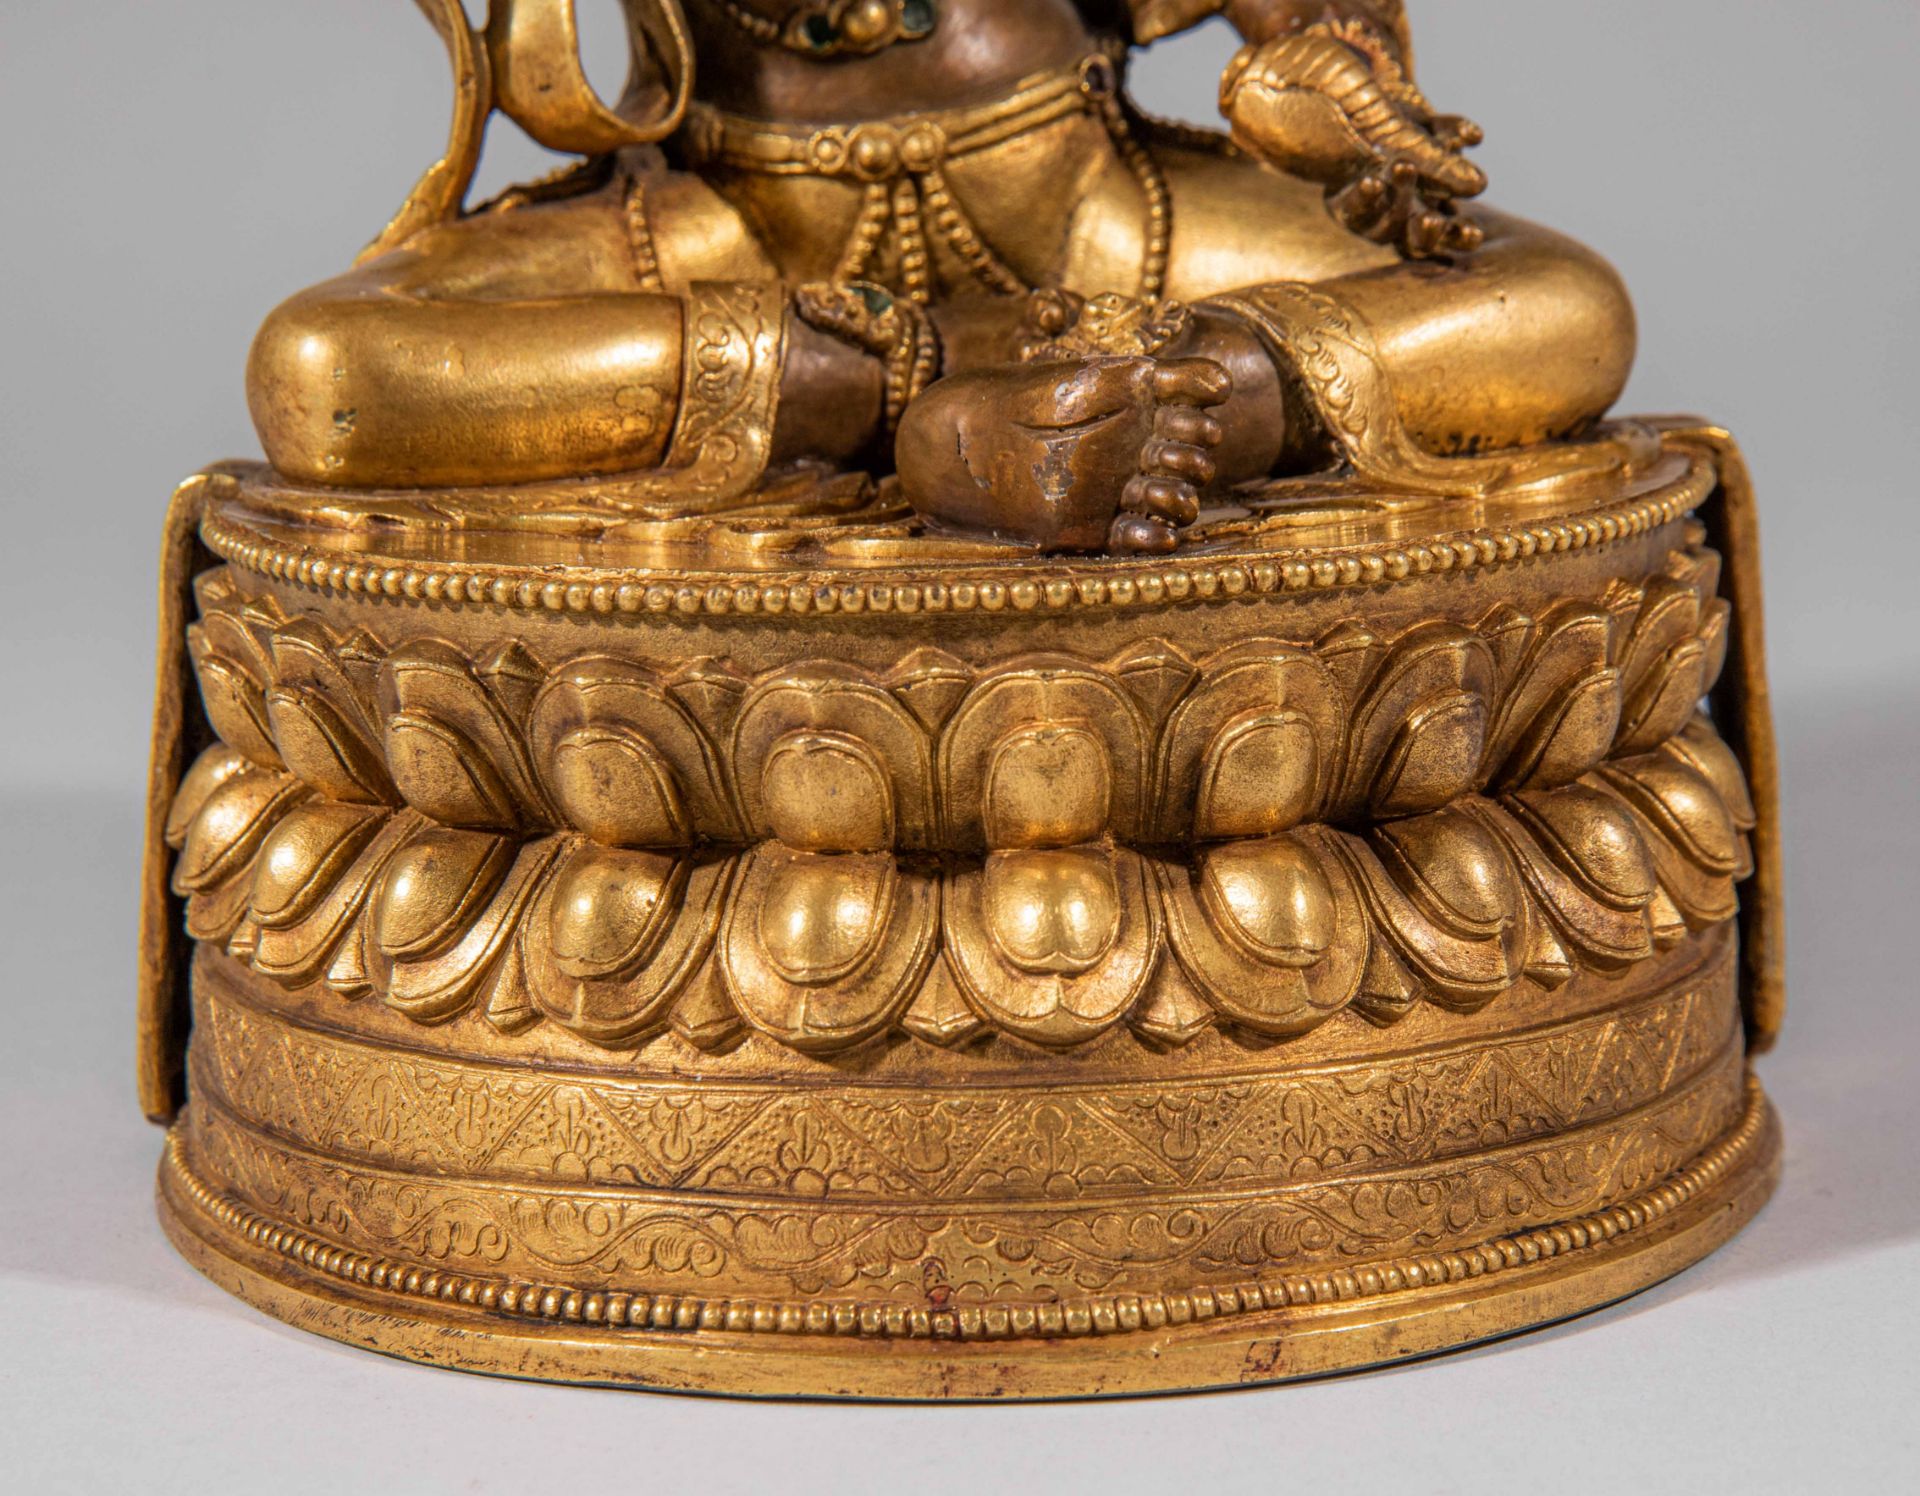 A Gilt Bronze Statue of Guanyin with Ten Arms, Qing Dynasty, China - Image 4 of 11